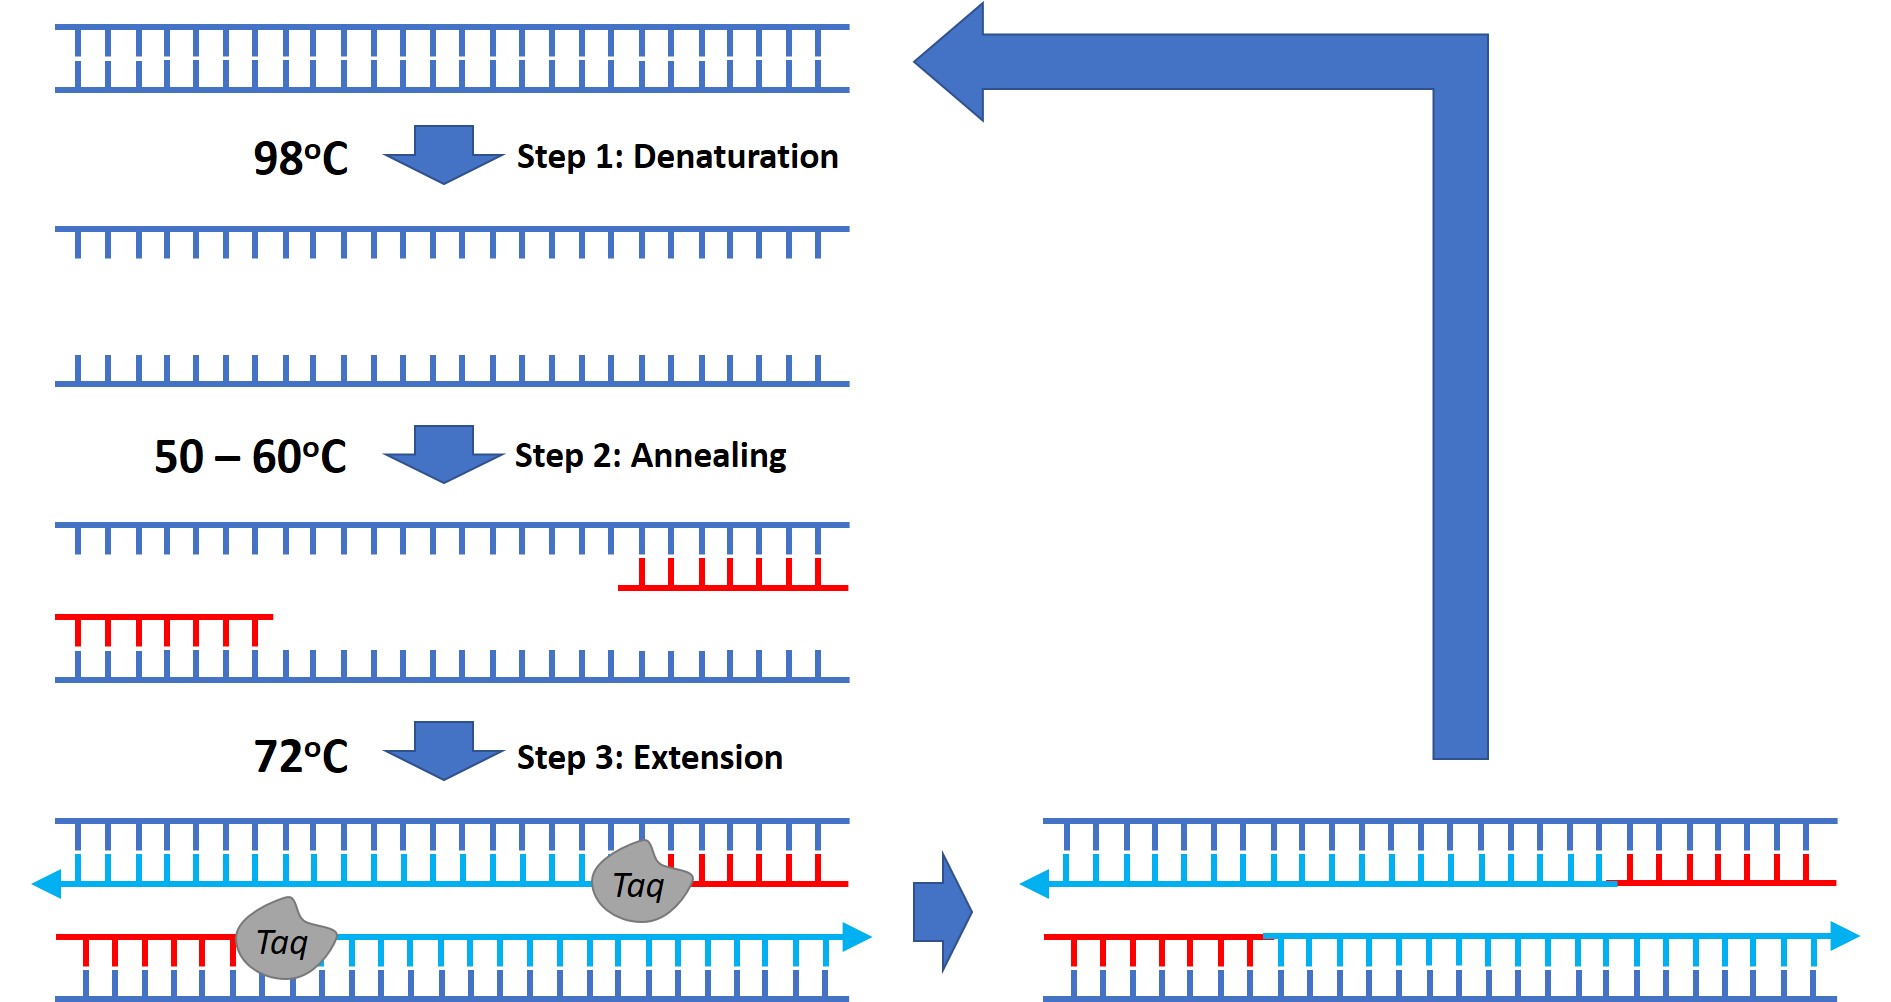 Steps and procedure of polymerase chain reaction (PCR)